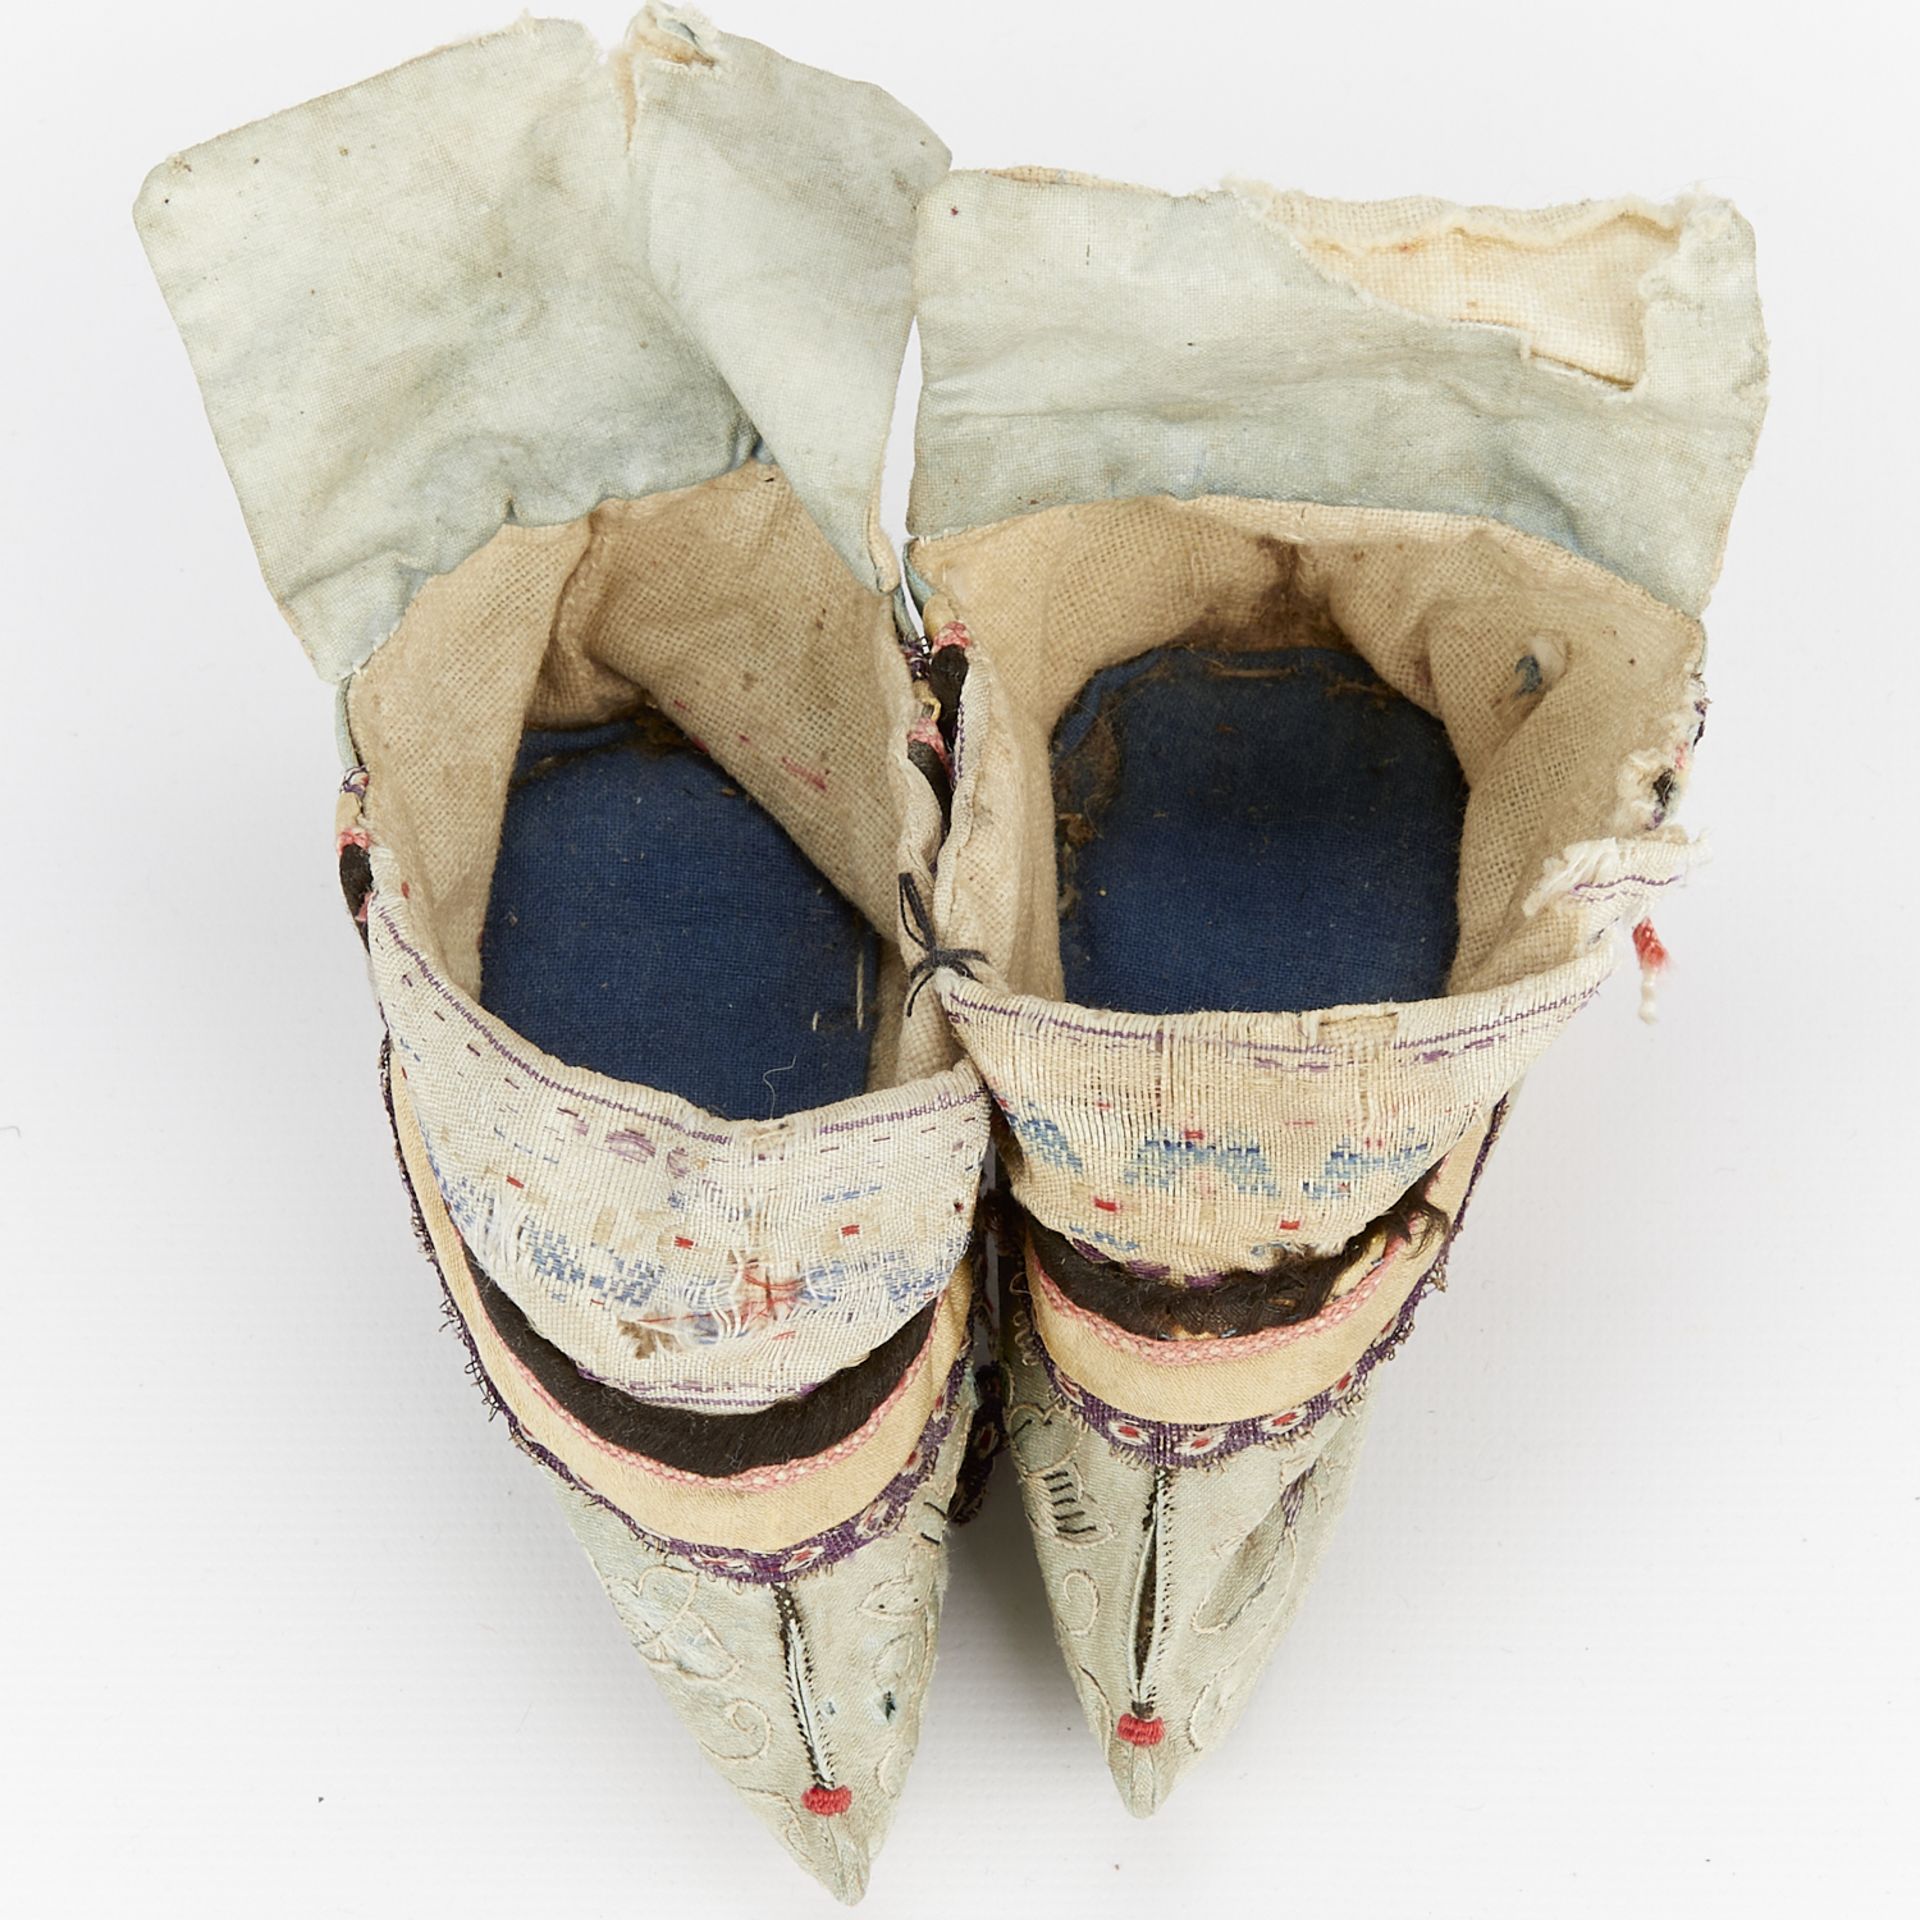 6 Pairs of Chinese Silk Foot Binding Shoes - Image 11 of 12